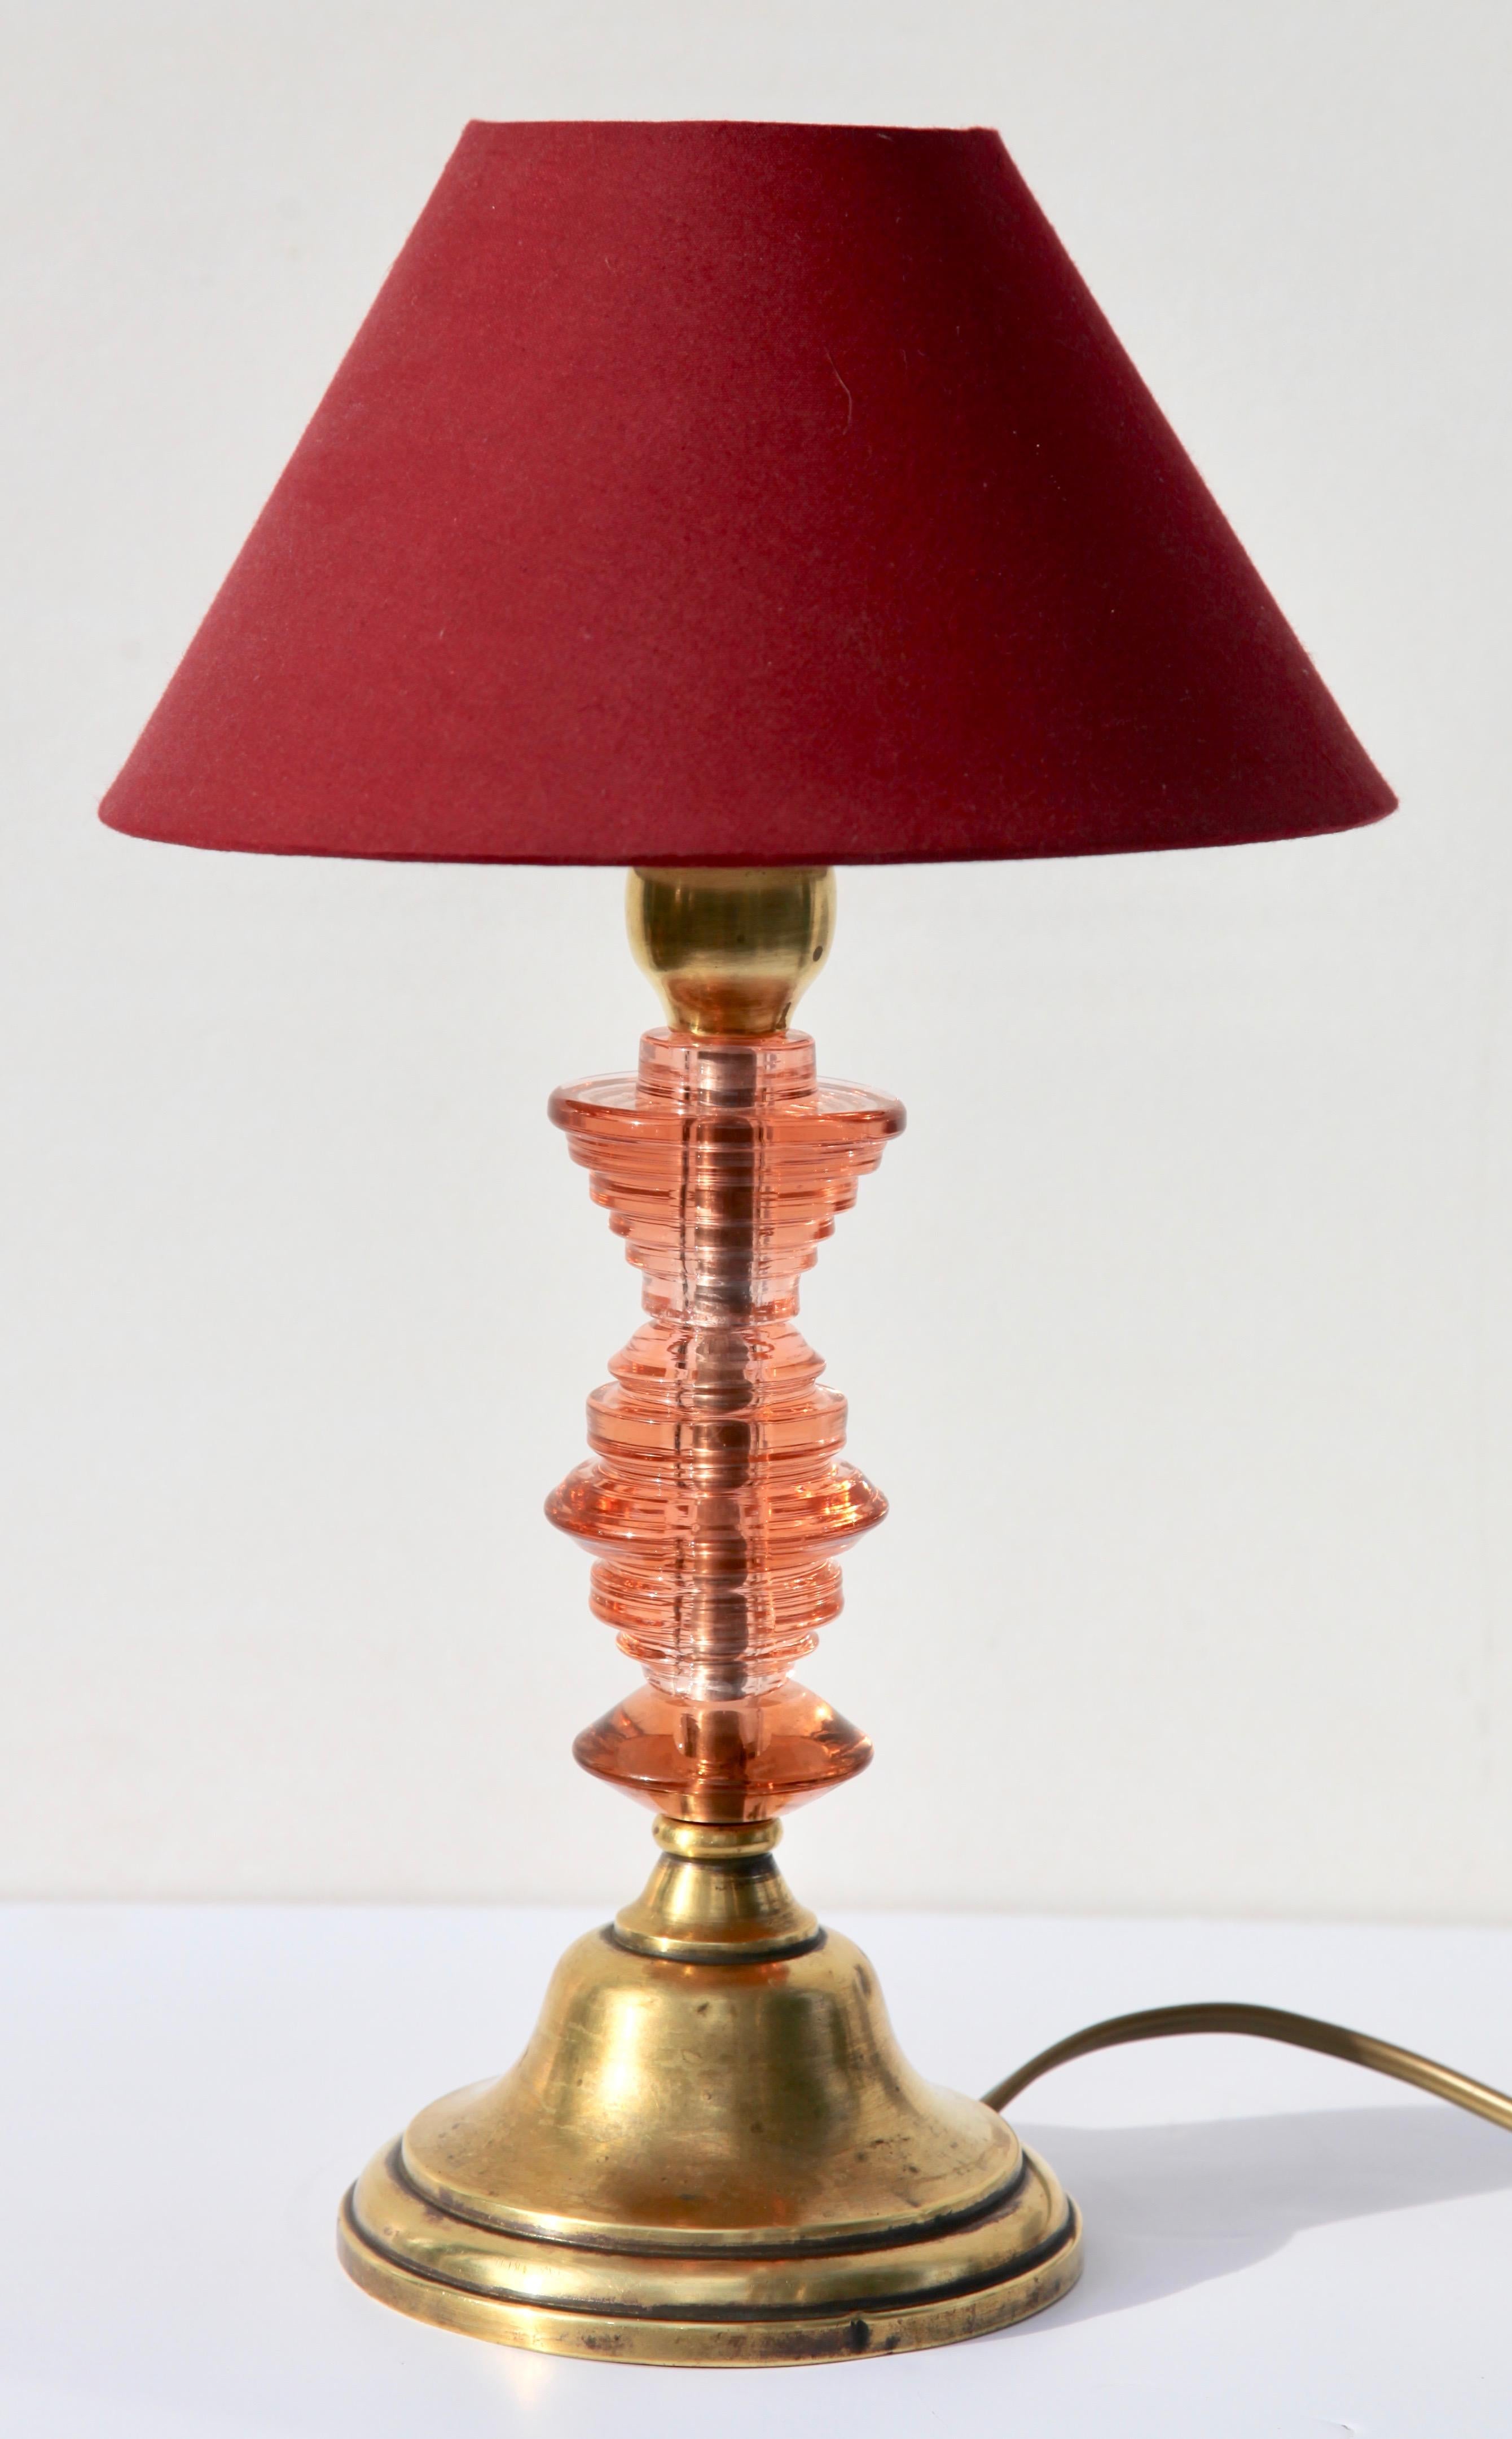 Belgian Art Deco Table Lamp in Colored Glass and with Brass Details, 1935 For Sale